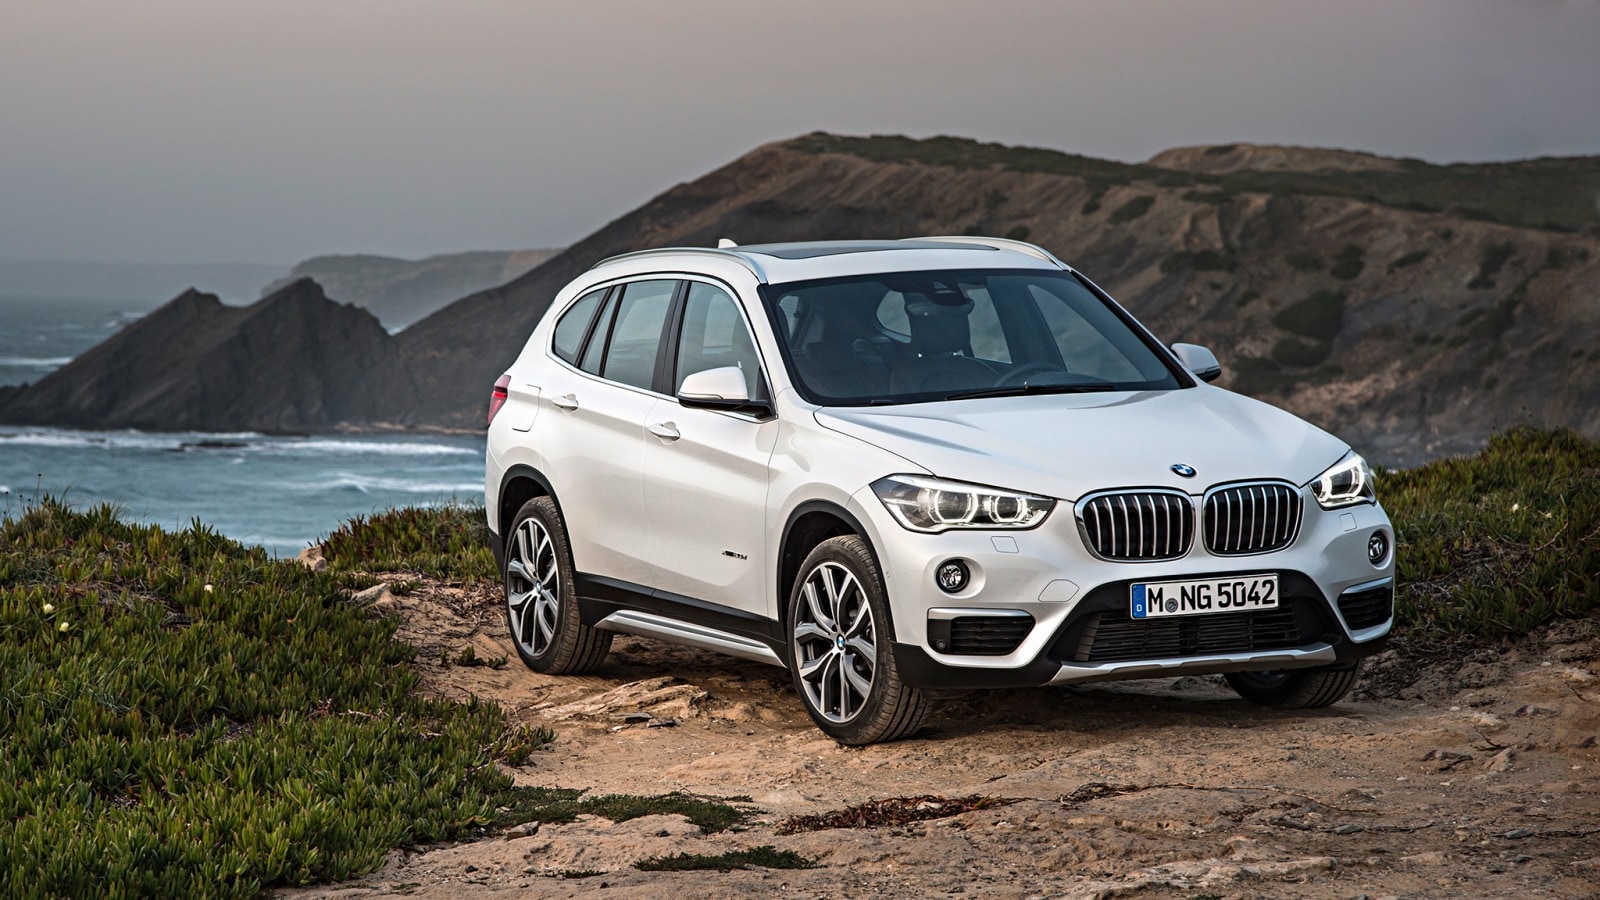 Used 2017 BMW X1 Review & Ratings | Edmunds